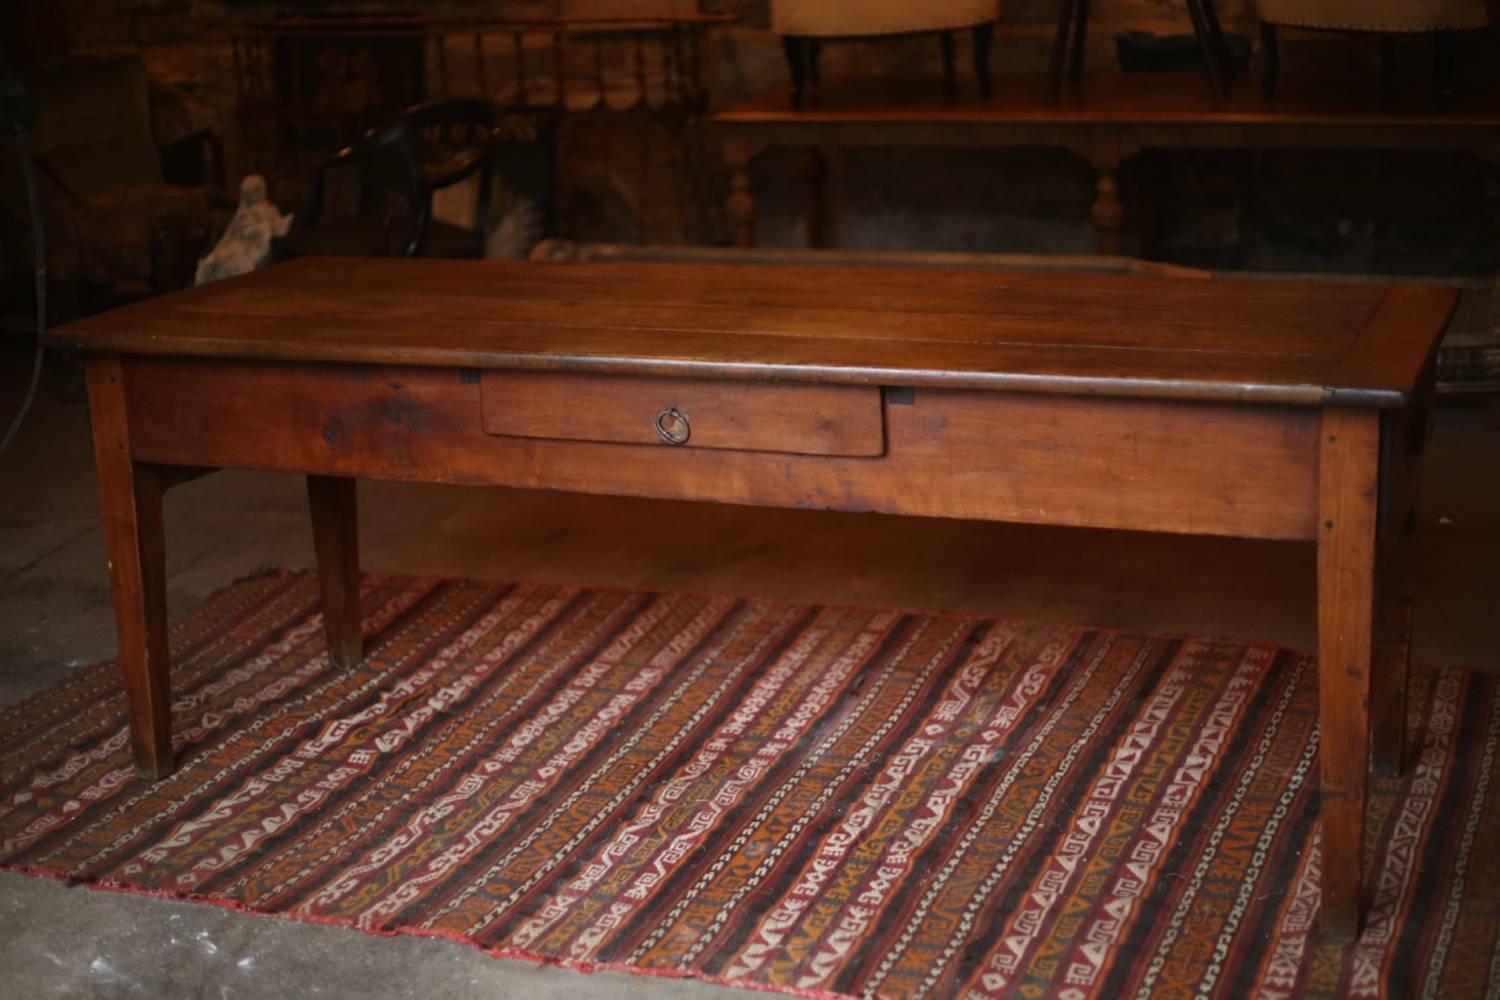 This is a superb quality early 19th century solid oak farmhouse table. It is made to a very high quality and has stood the test of time very well. It has no major damage, minor scratches and wear to the top consistent with age is all. The drawers